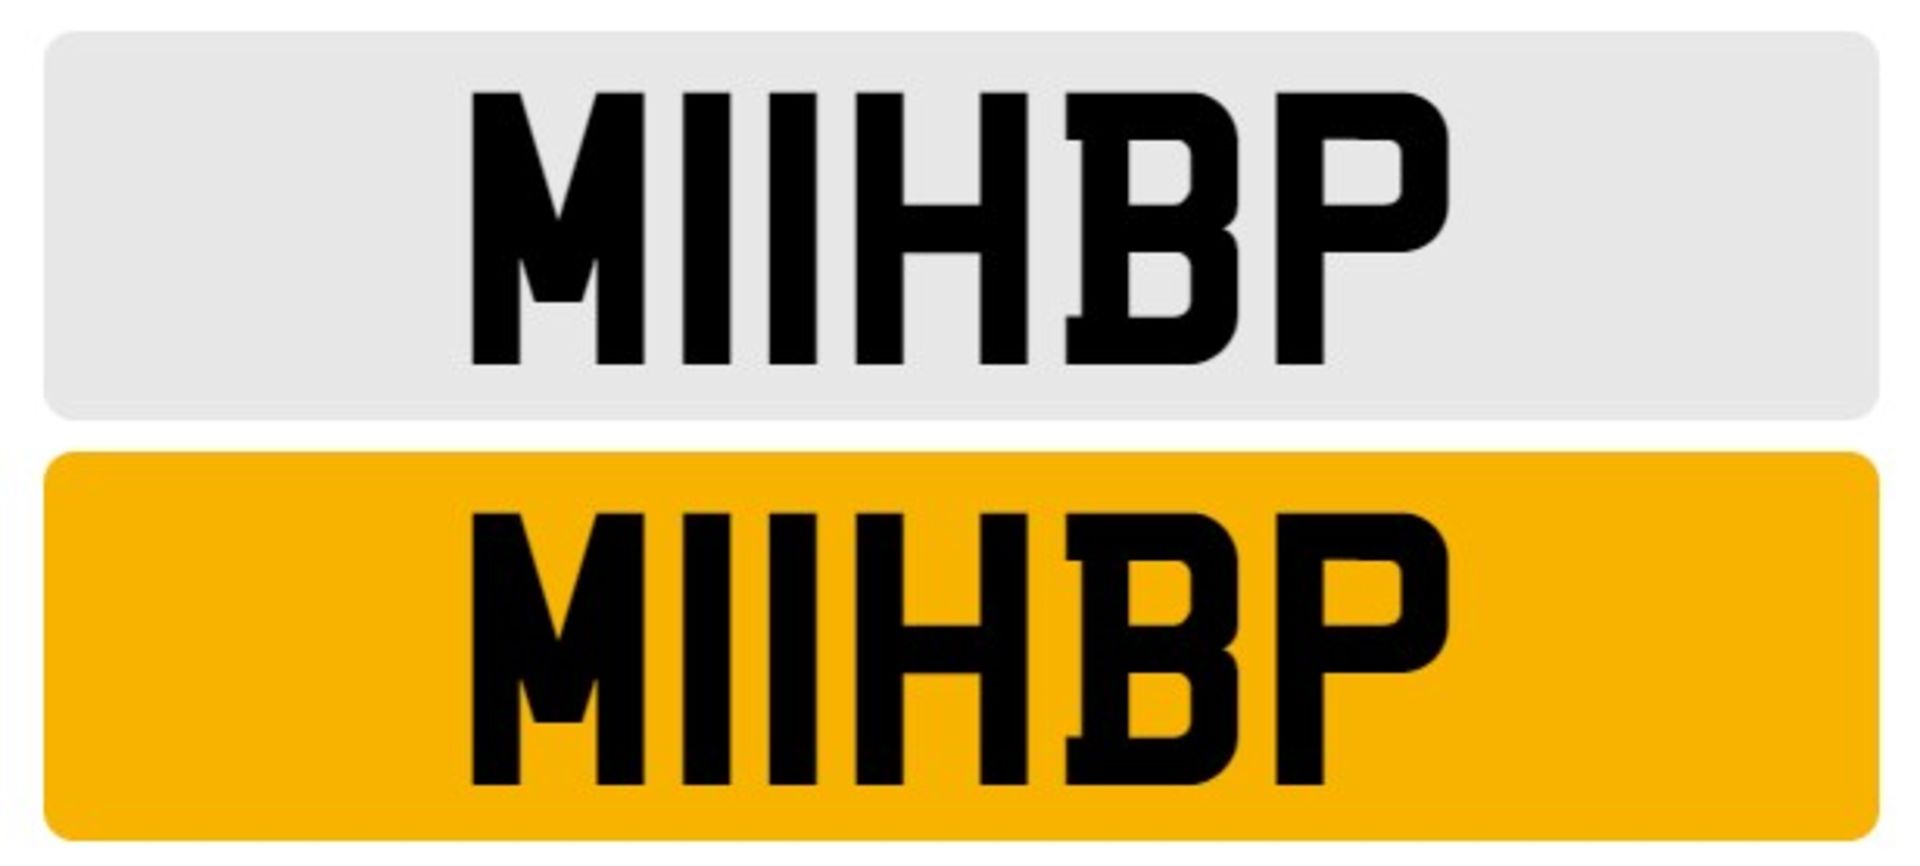 Cherished registration number.: M11HBP An administration fee of £80 + VAT will be added to the